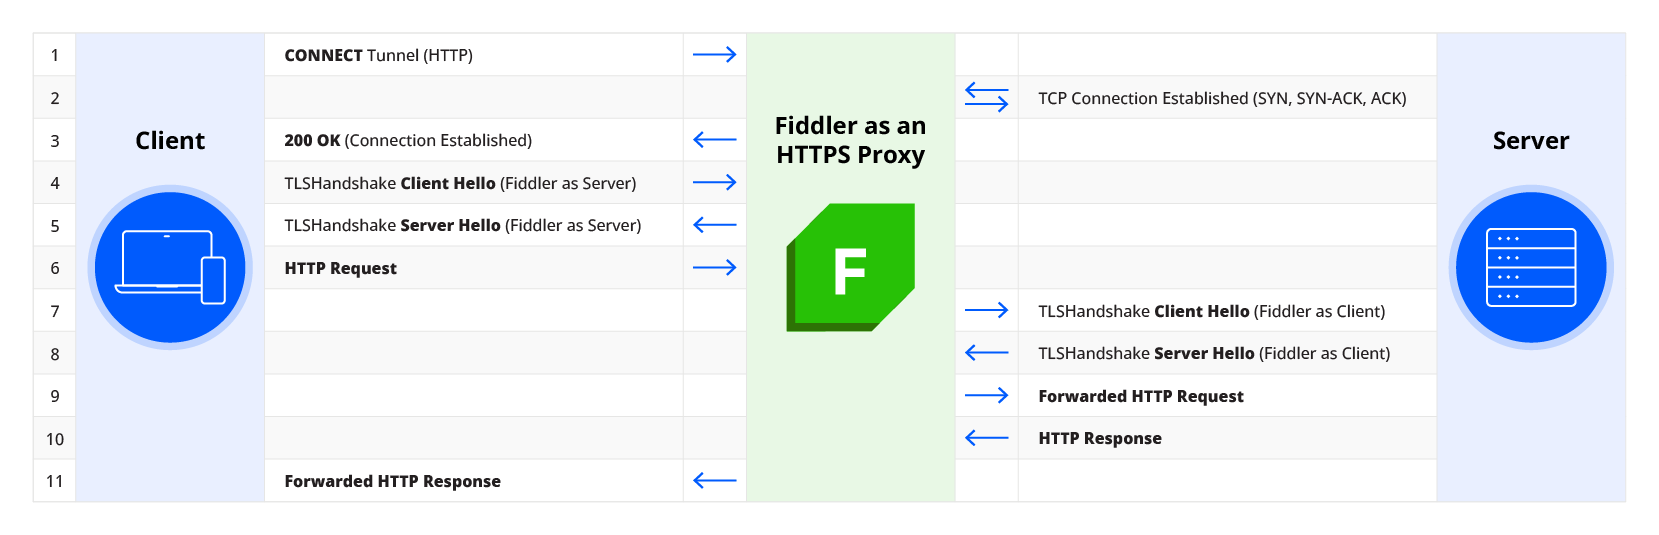 Fiddler as an HTTPS proxy is between client and server. Listed are the steps of communication: 1. Client connect tunnel http to Fiddler. 2. TCP Connection established between fiddler and server. 3. Fiddler 200 ok connection established to client. 4. TLSHandshake Client Hello to Fiddler as server. 5. TLSHandshake  Server Hello from Fiddler as server to client. 6. Client sends HTTP request. 8. TLSHandshake Client Hello Fiddler as client to server. 9. TLSHandshake  Server Hello from server to fiddler as client. 10. Fiddler forwards HTTP request to server. 11. Server sends HTTP response to Fiddler. 12. Fiddler forwards HTTP response to client.